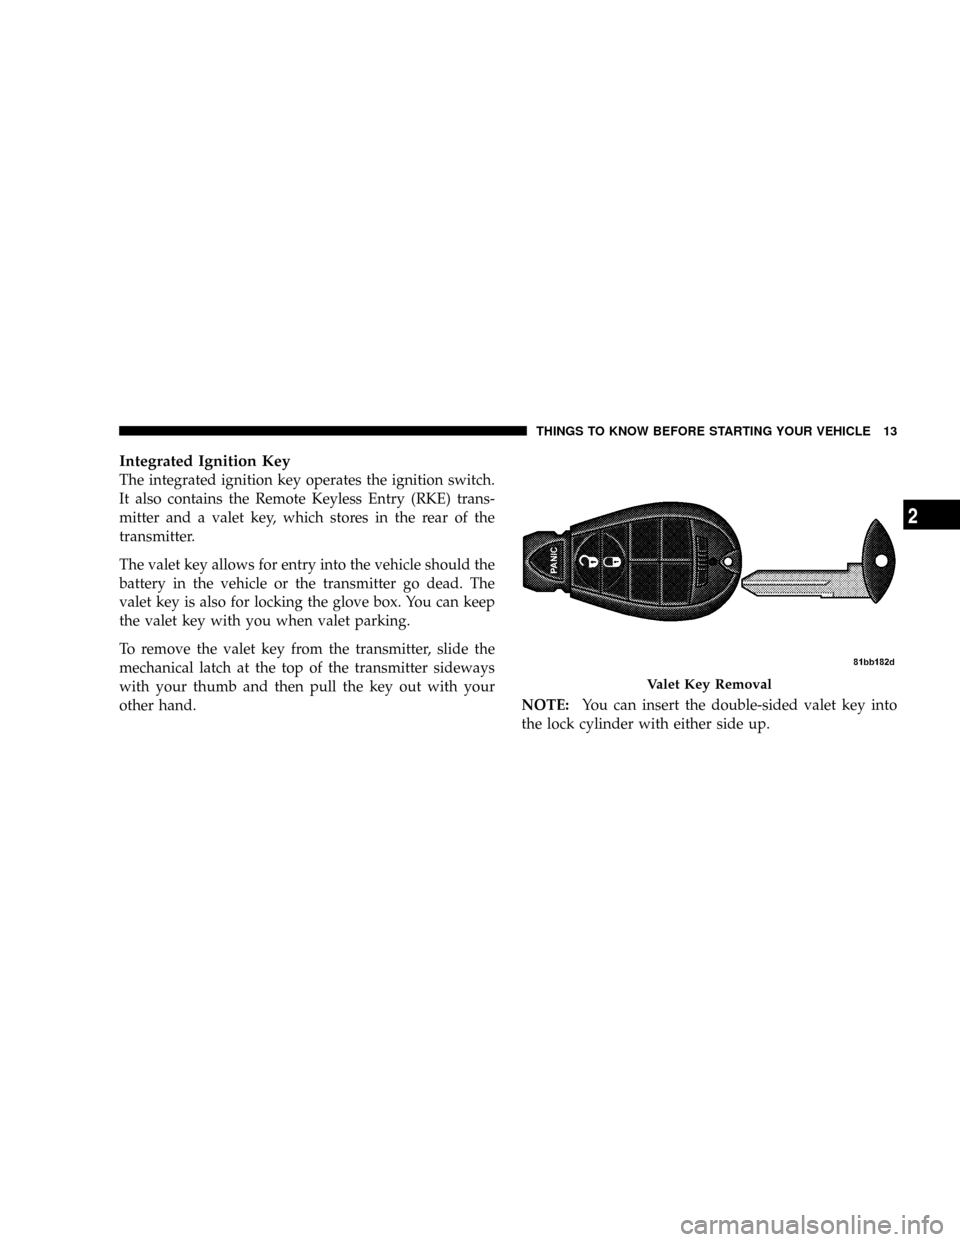 CHRYSLER TOWN AND COUNTRY 2008 5.G Owners Manual Integrated Ignition Key
The integrated ignition key operates the ignition switch.
It also contains the Remote Keyless Entry (RKE) trans-
mitter and a valet key, which stores in the rear of the
transmi